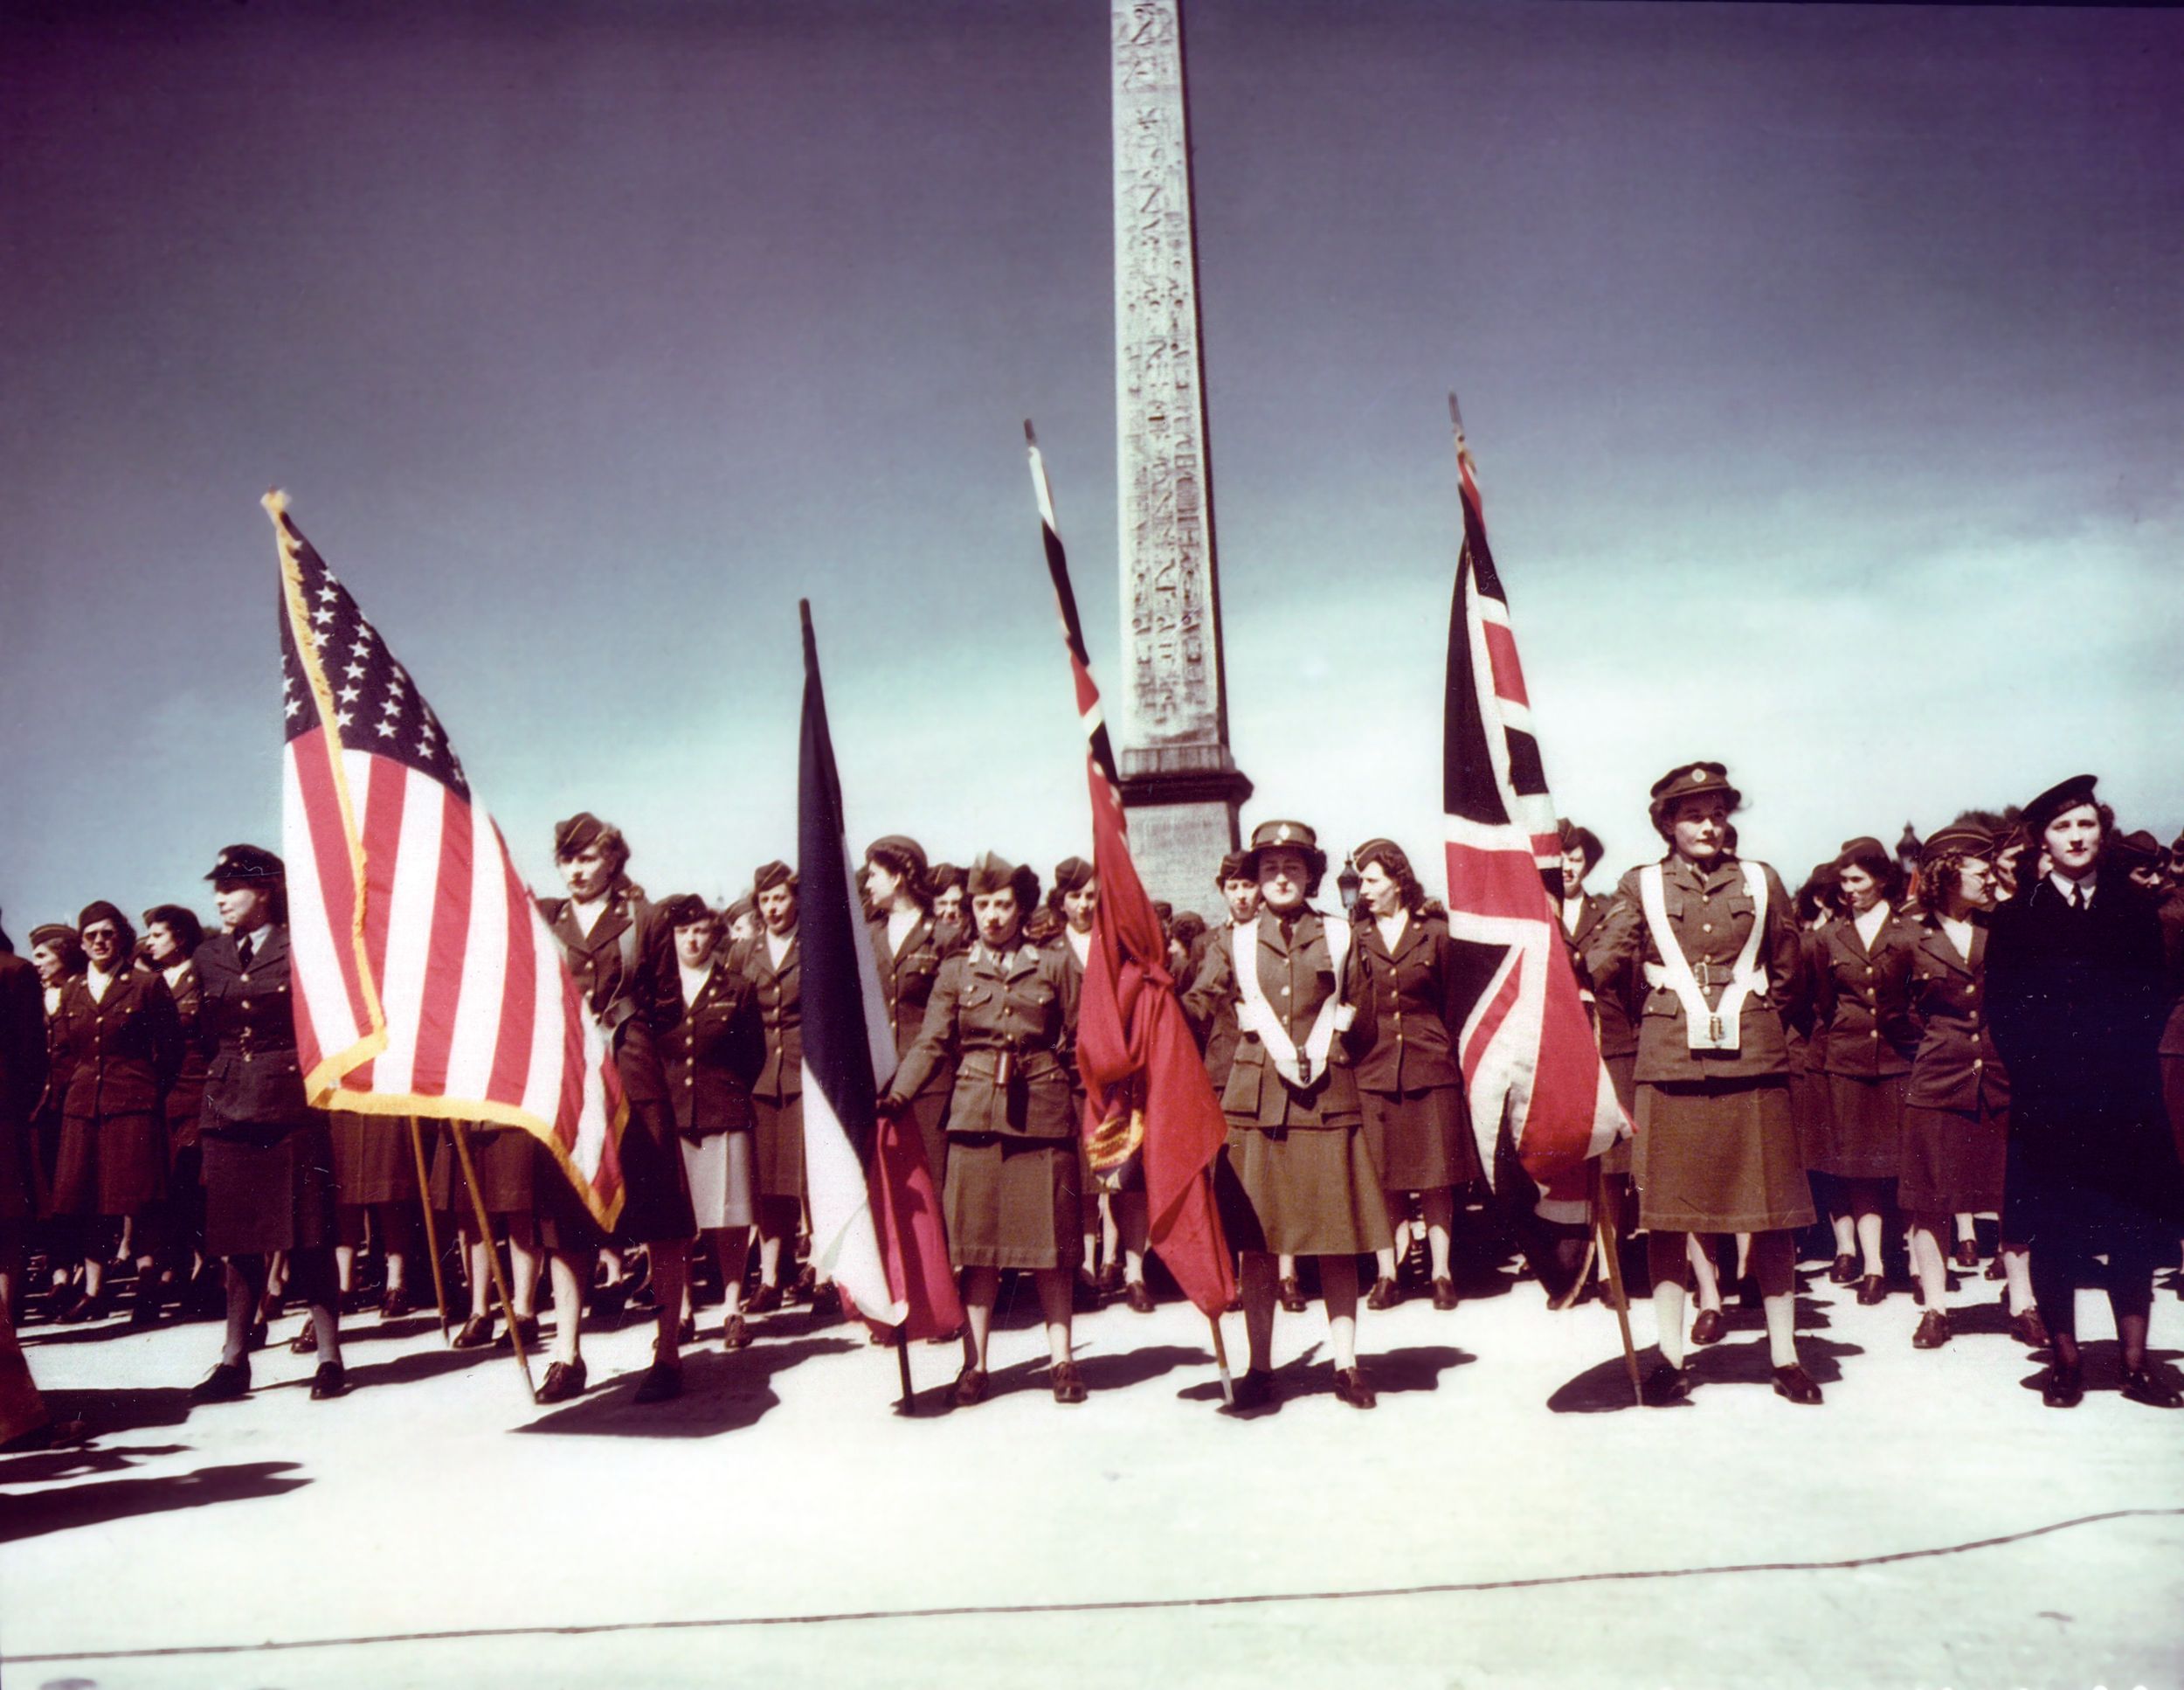 In front of the Obelisk of Luxor, American, French, Canadian and British WACs (Women’s Army Corps), prepare to parade down the Champs Elysees in honor of the WACs’ third anniversary.